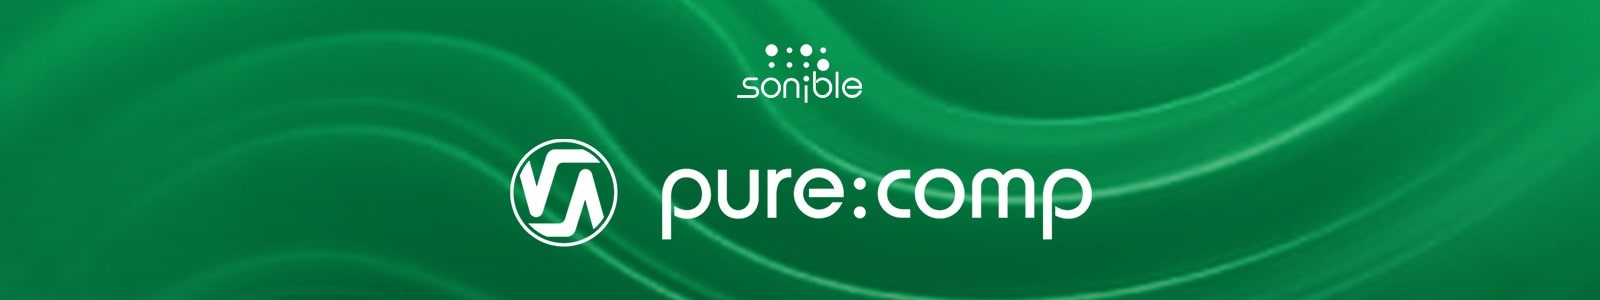 pure:comp by Sonible